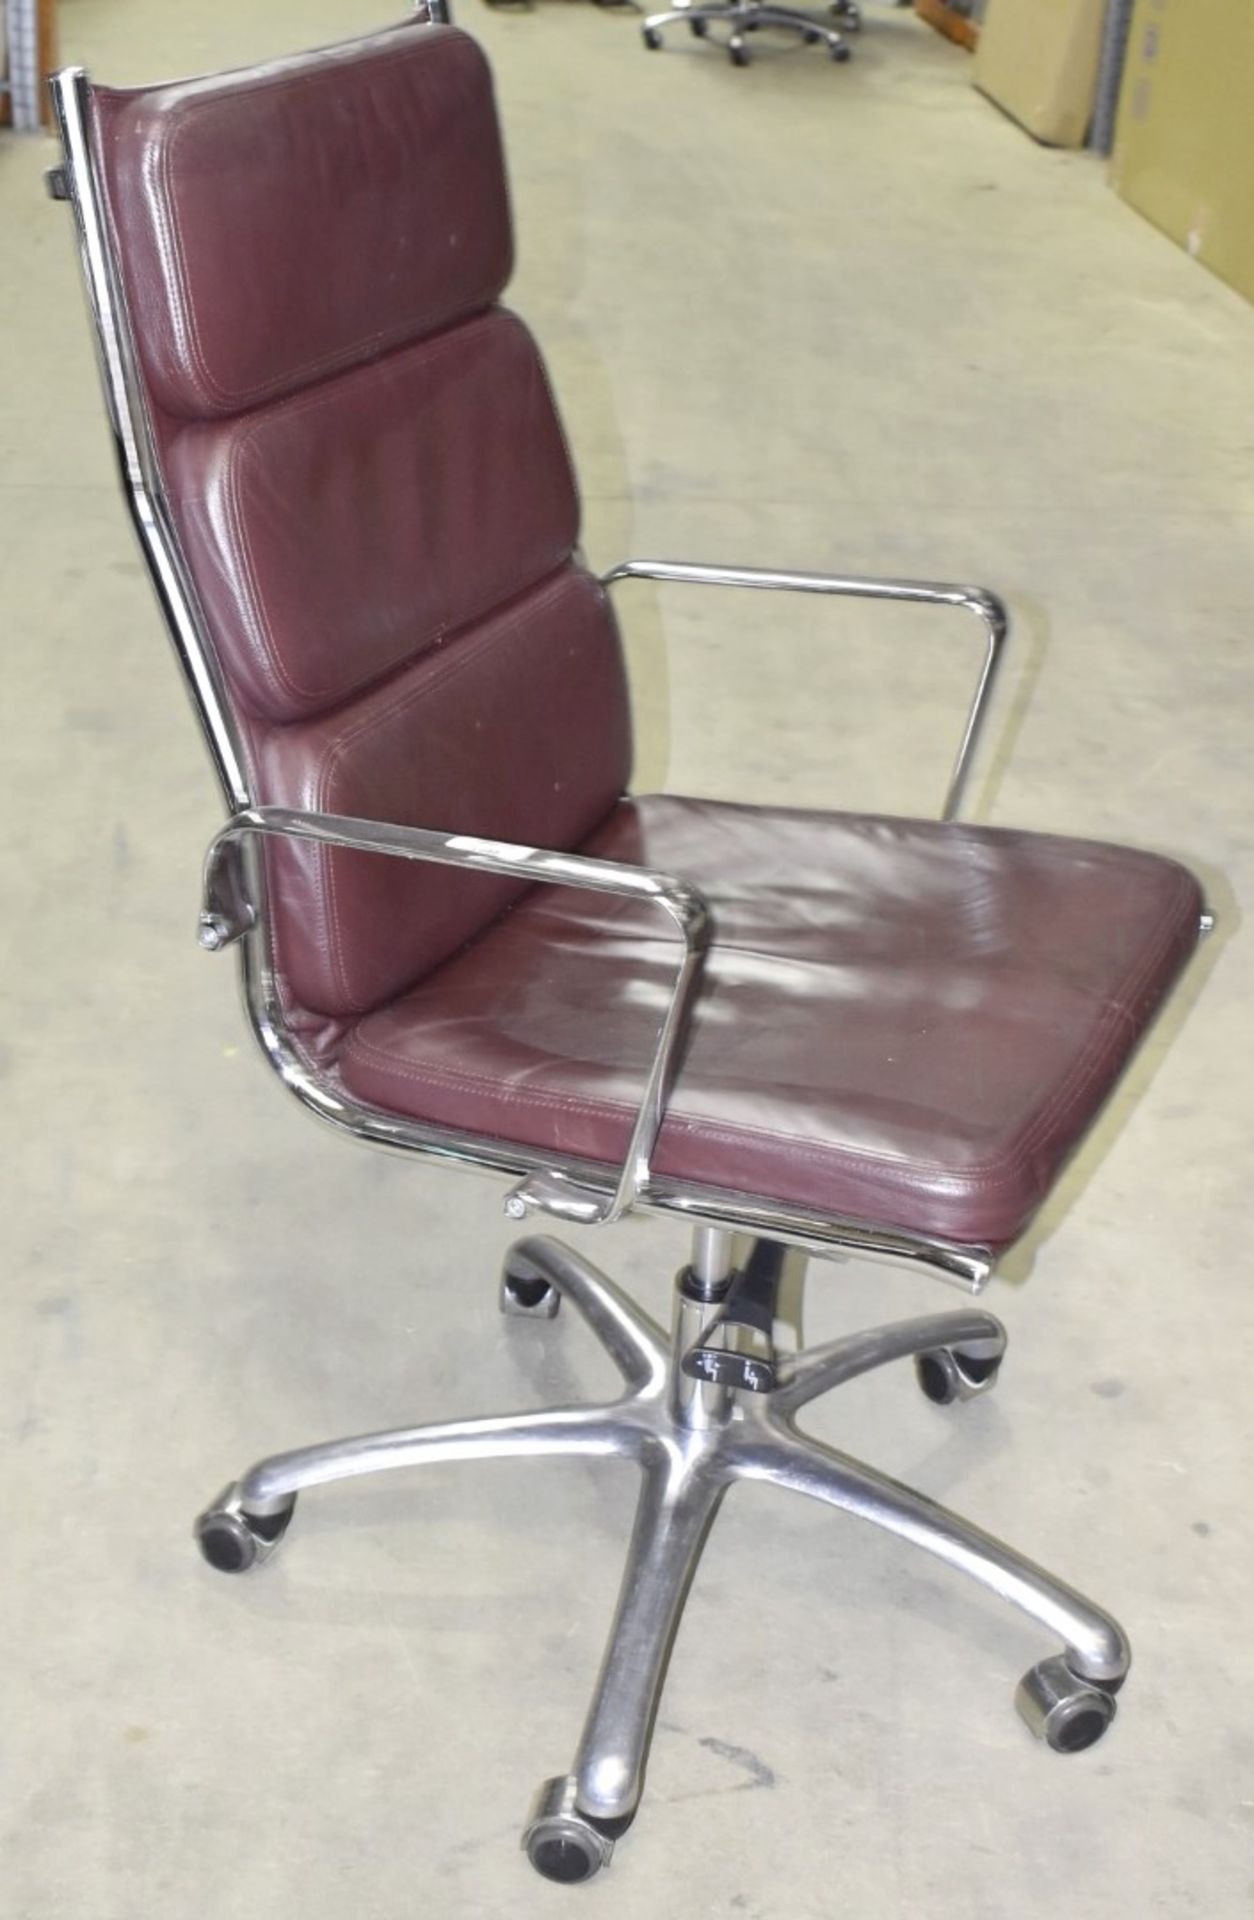 1 x LUXY Leather Upholstered Soft Pad Office Swivel Chair, Dark Brown - RRP £1,600 - Image 5 of 8